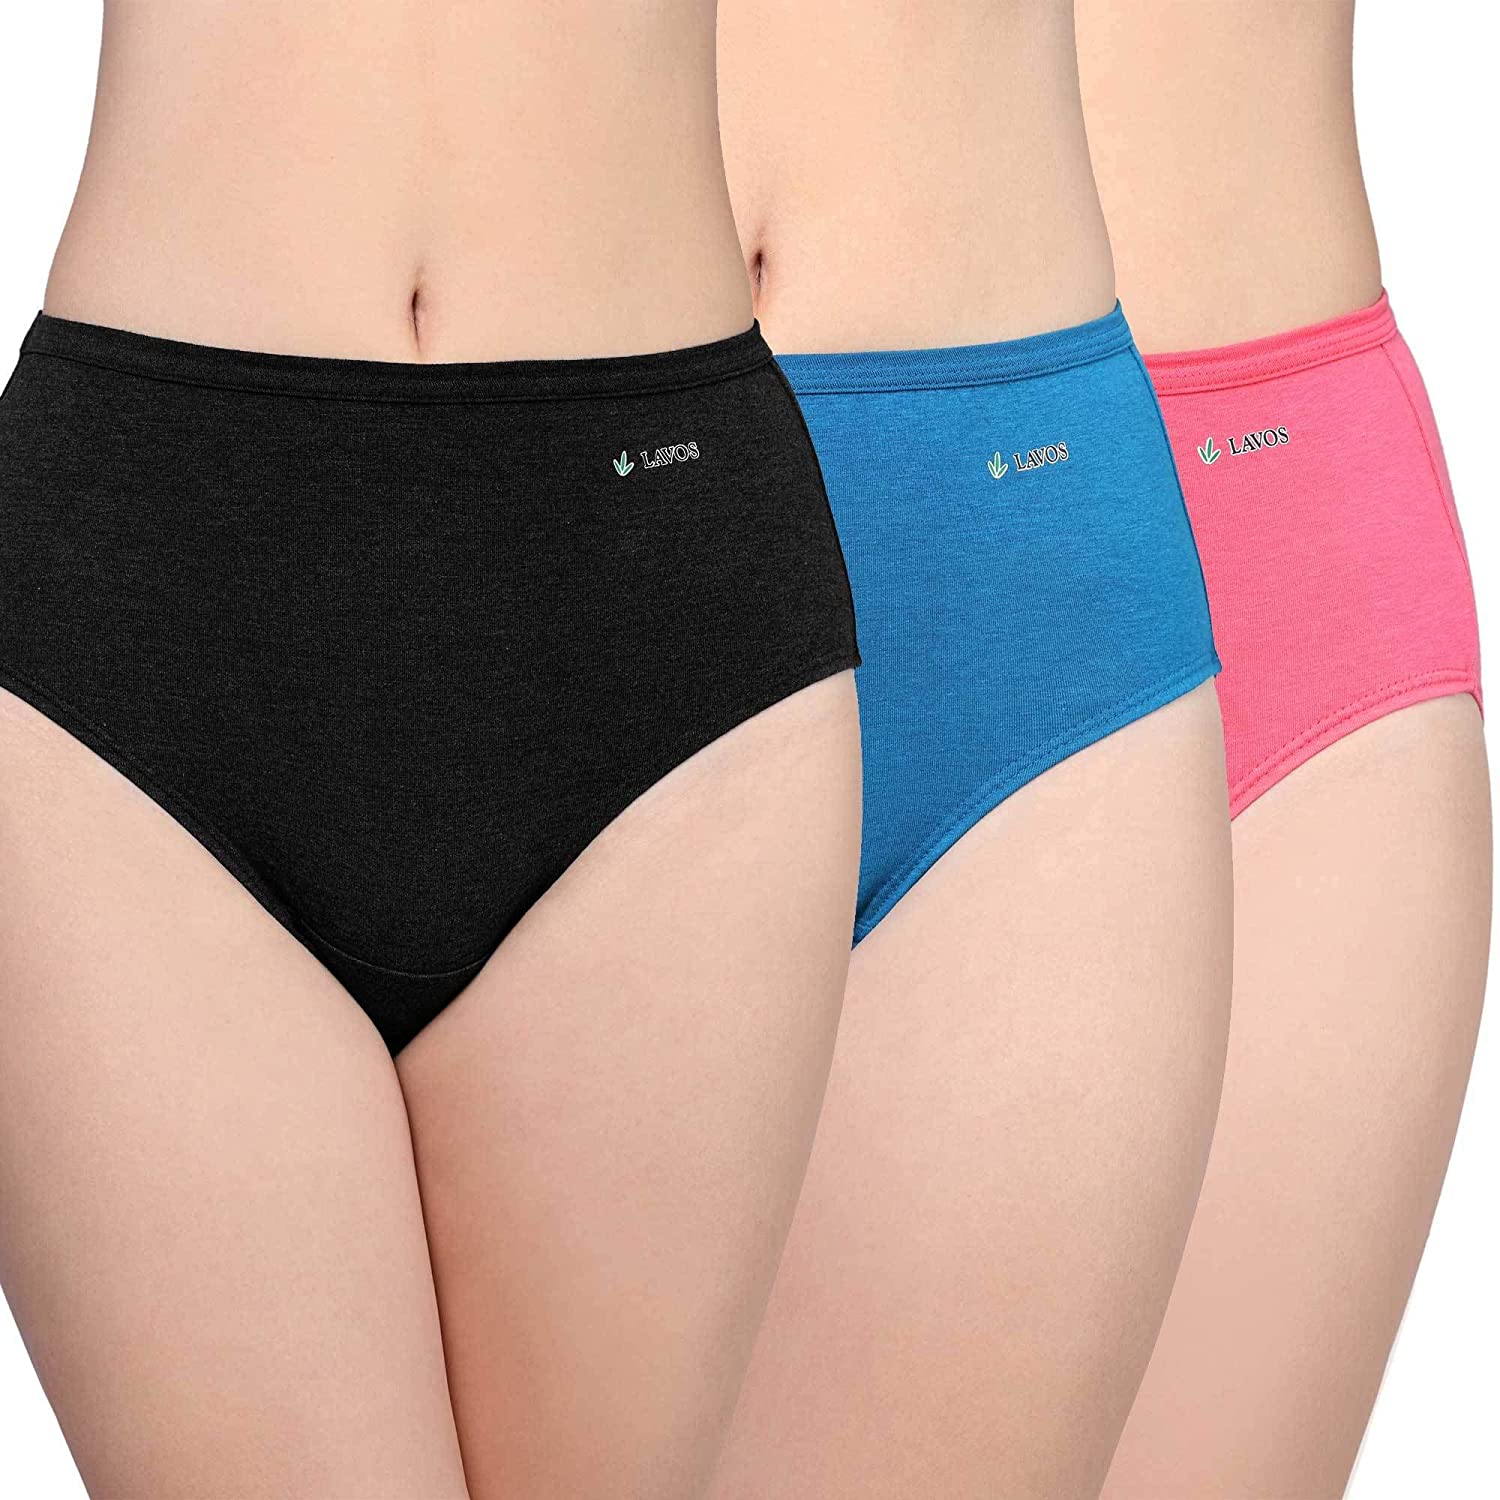 Buy Hipster Panty For Women Online - Lavos Performance